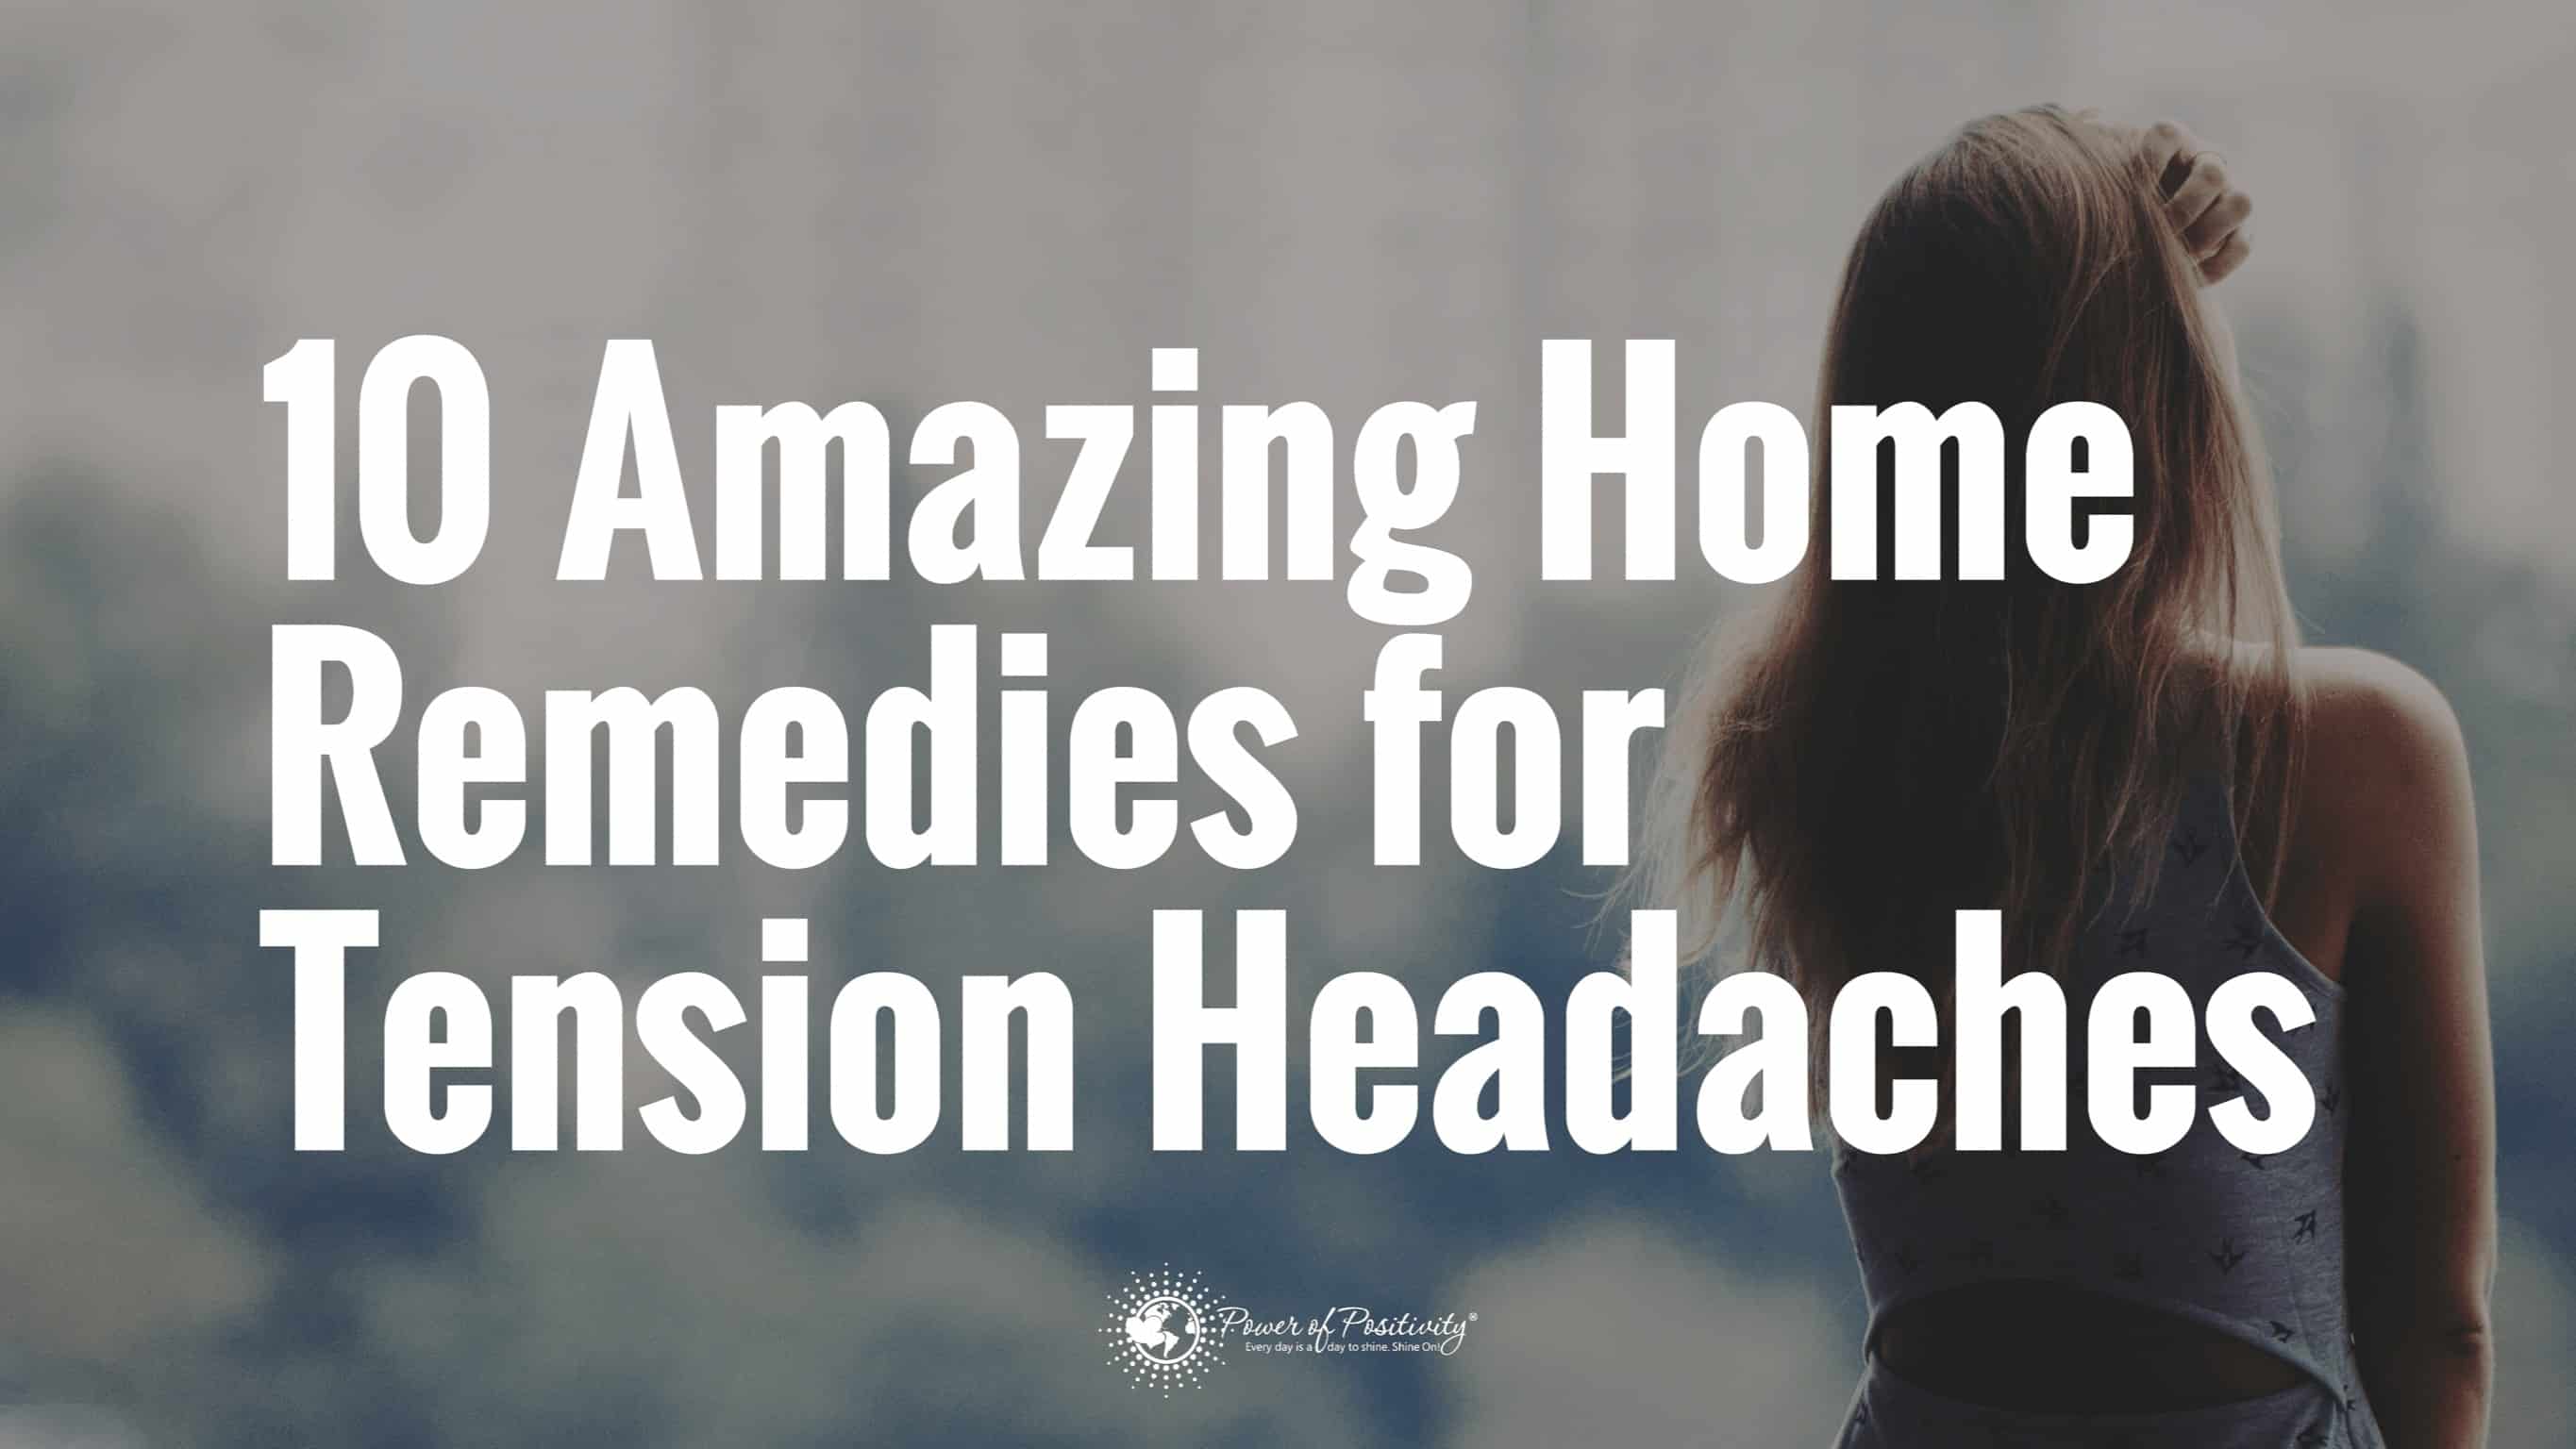 10 Amazing Home Remedies for Tension Headaches